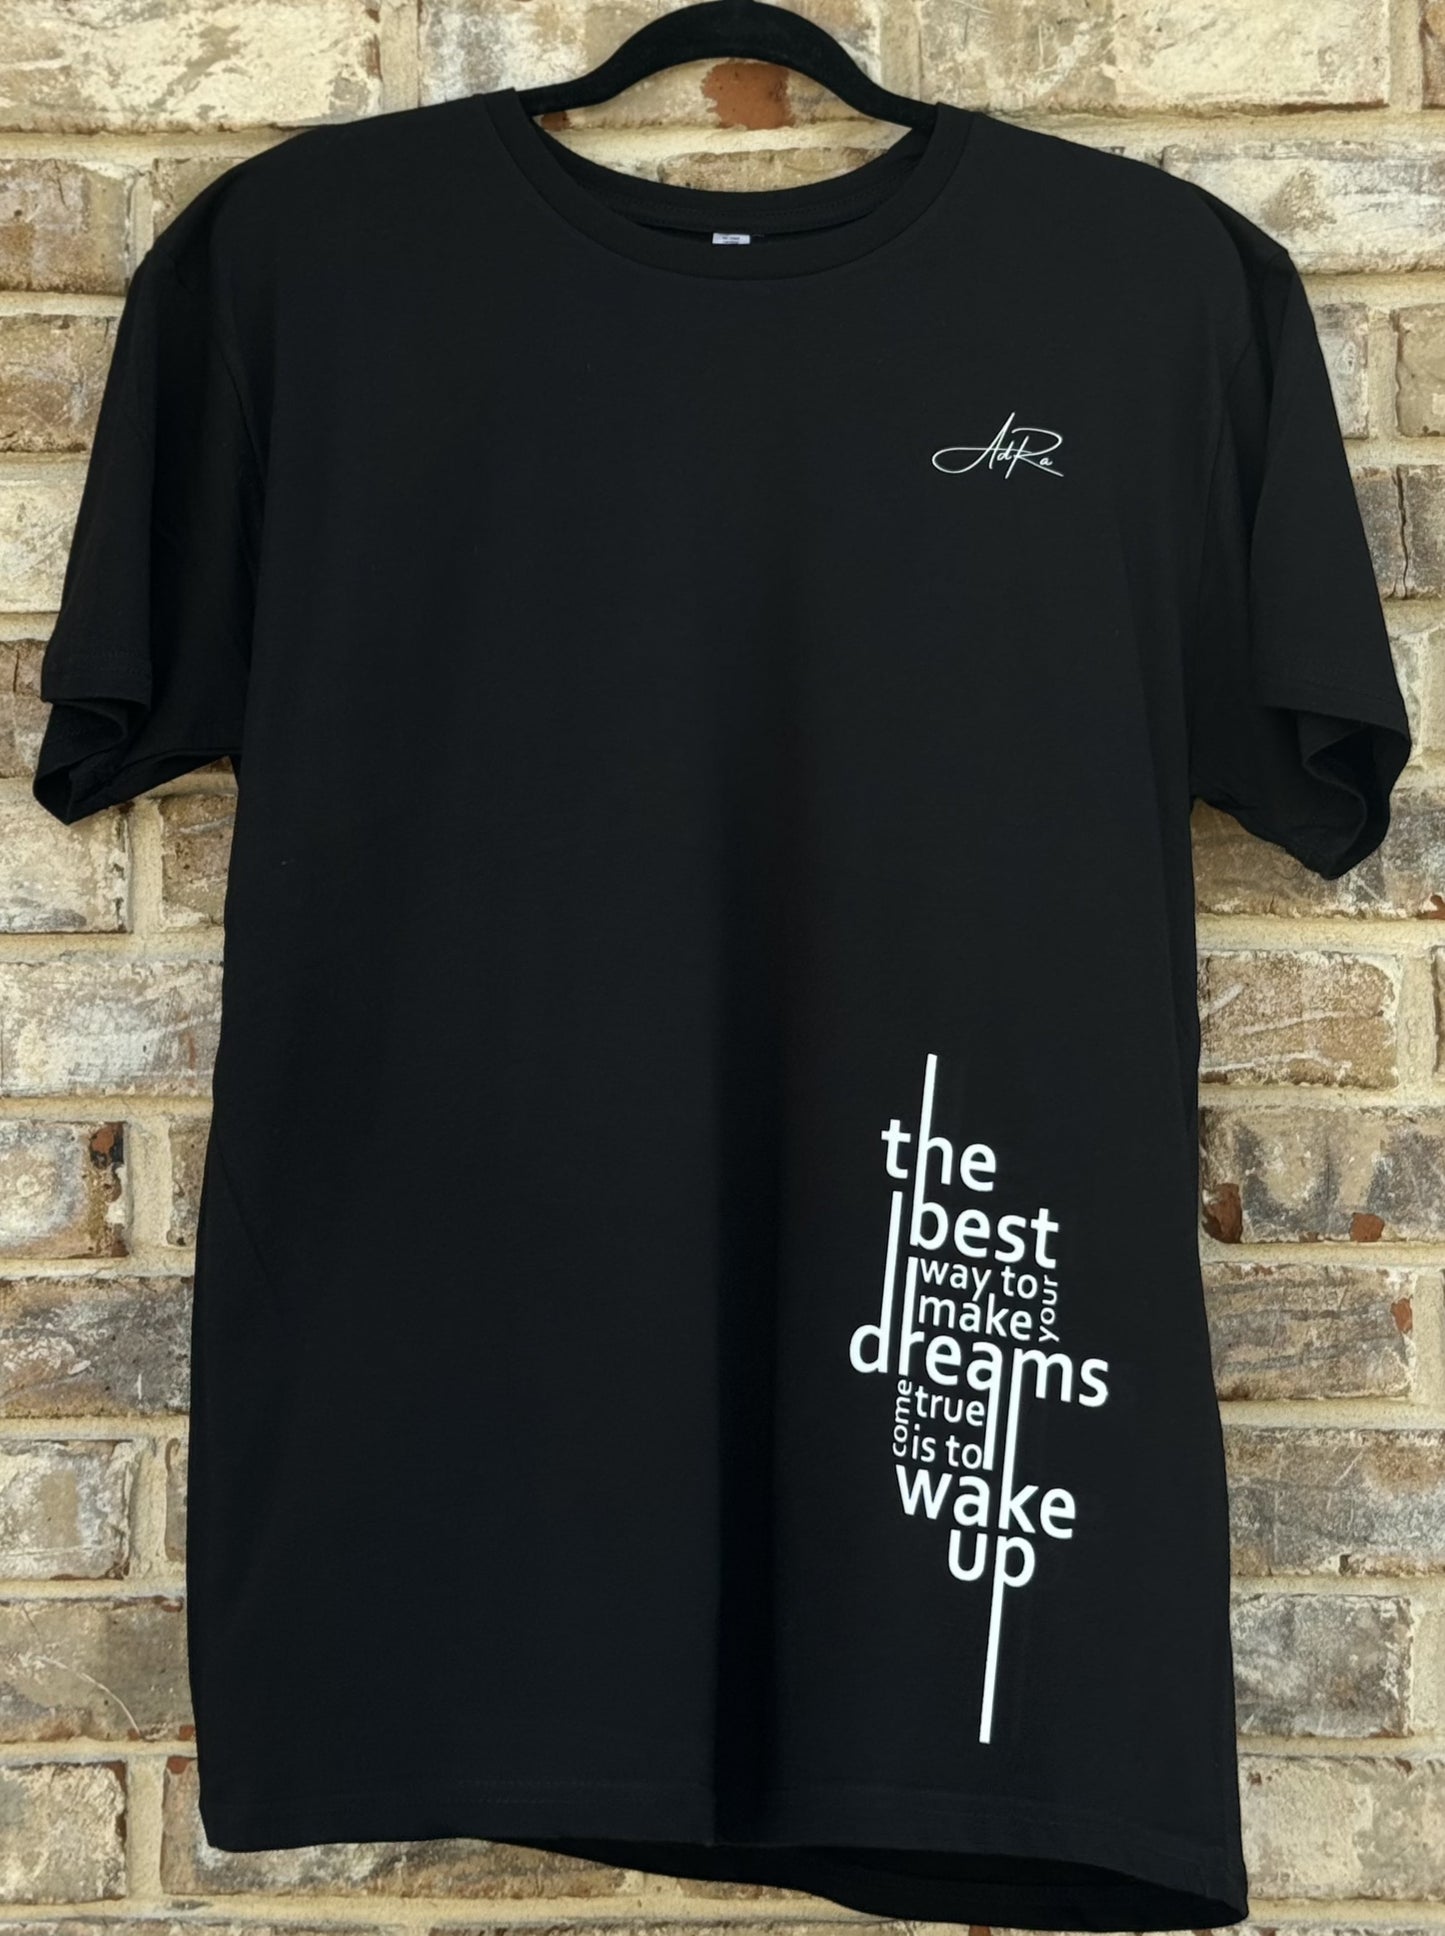 "Wake Up" Dream-Activating Tee - Inspire Action with AdRa Apparel